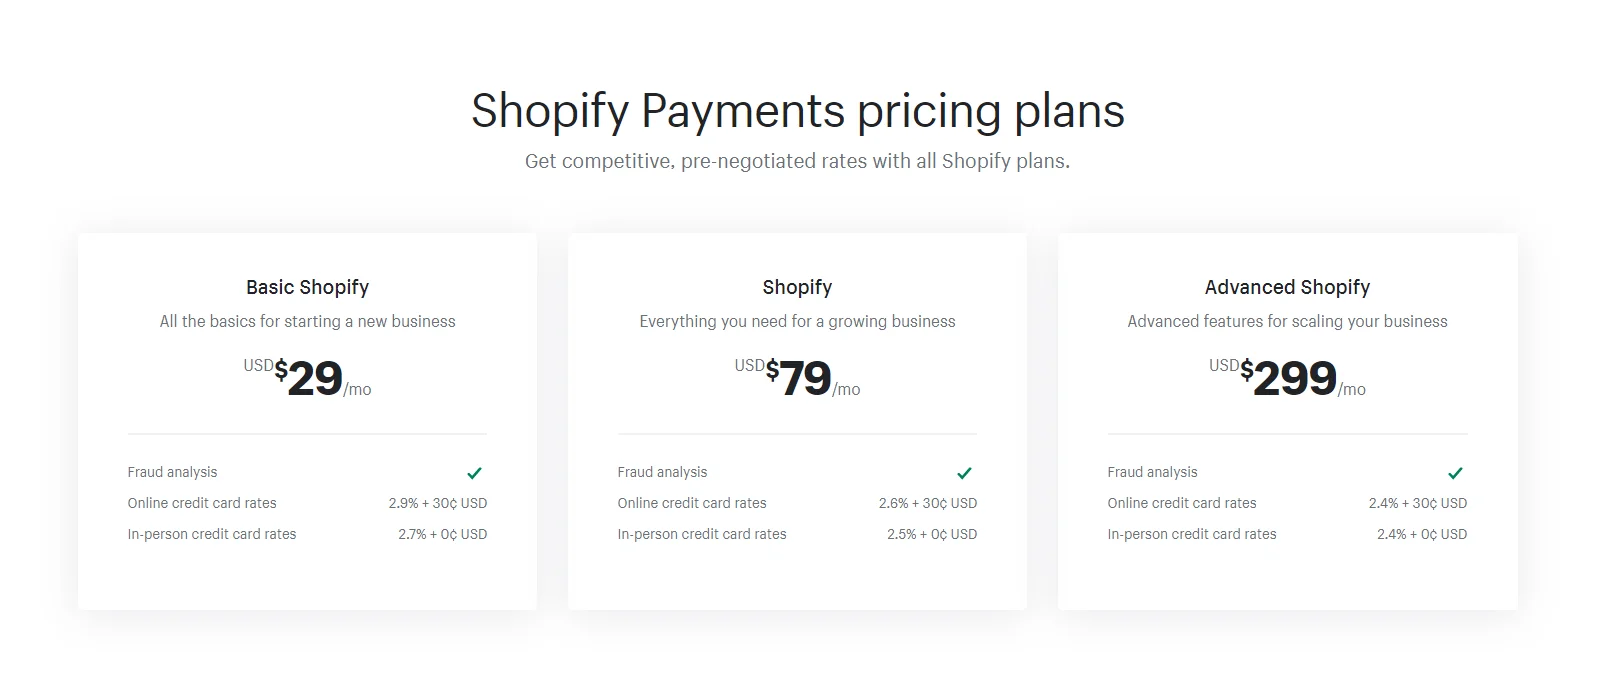 Shopify Payments pricing plan